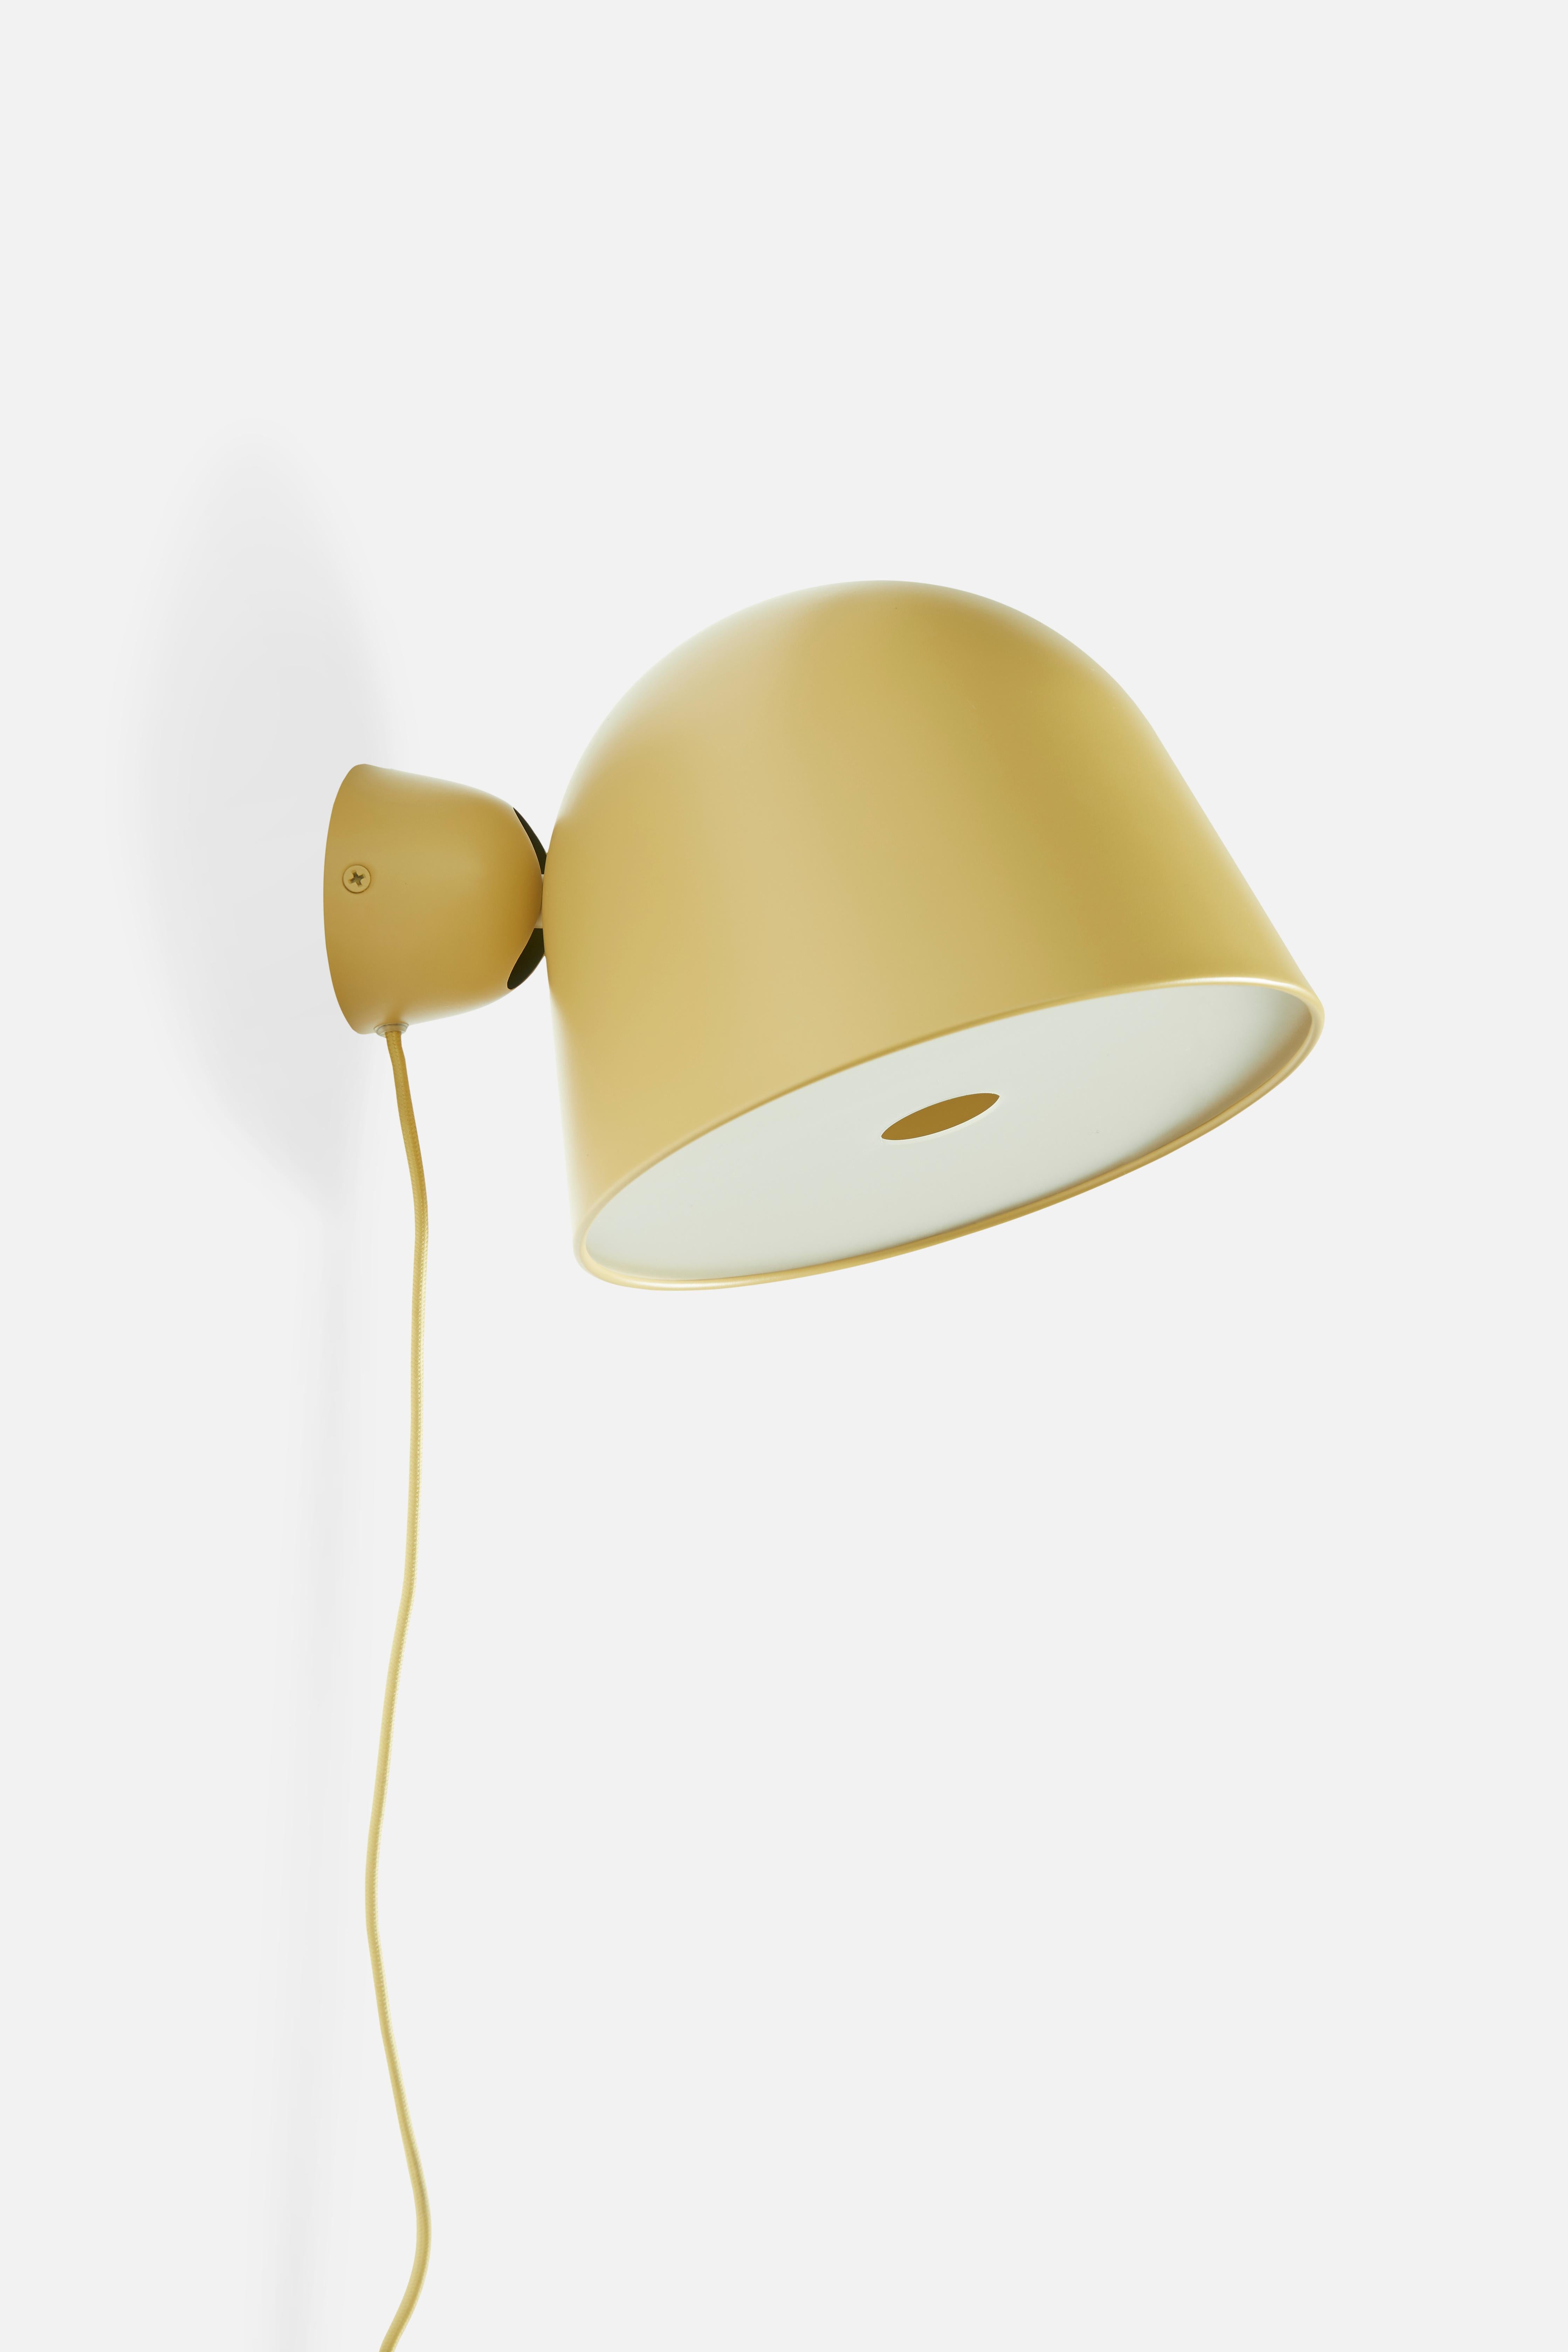 Yellow kuppi wall lamp by Mika Tolvanen
Materials: metal.
Dimensions: D 24 x H 16.5 cm
Available in black or mustard yellow.

Mika Tolvanen is a renowned Finnish designer. After graduating from The Royal College
of Art, London, he established